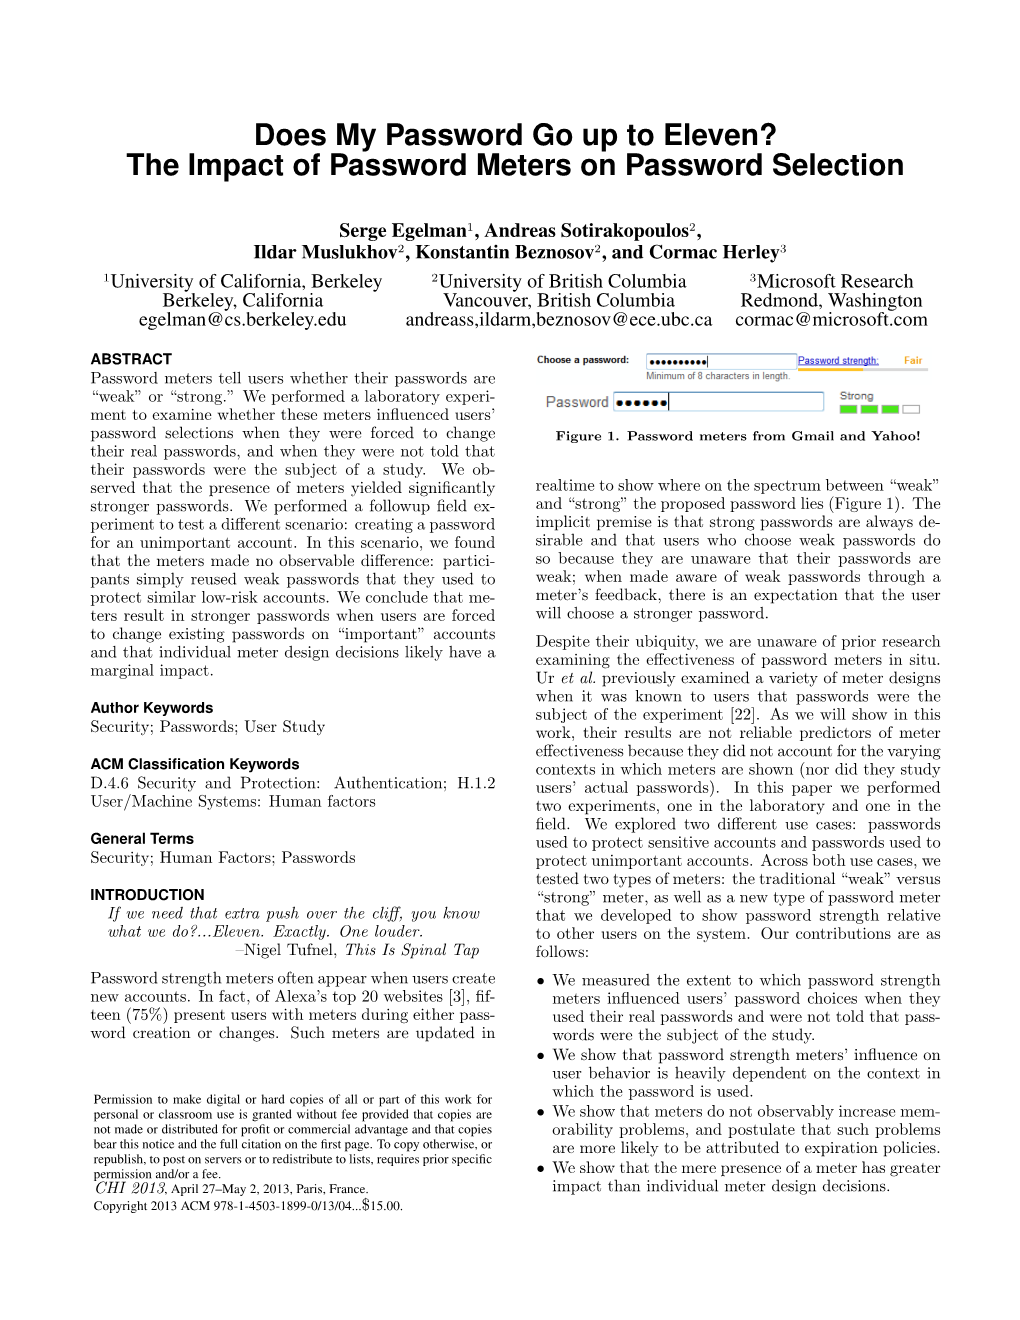 Does My Password Go up to Eleven? the Impact of Password Meters on Password Selection